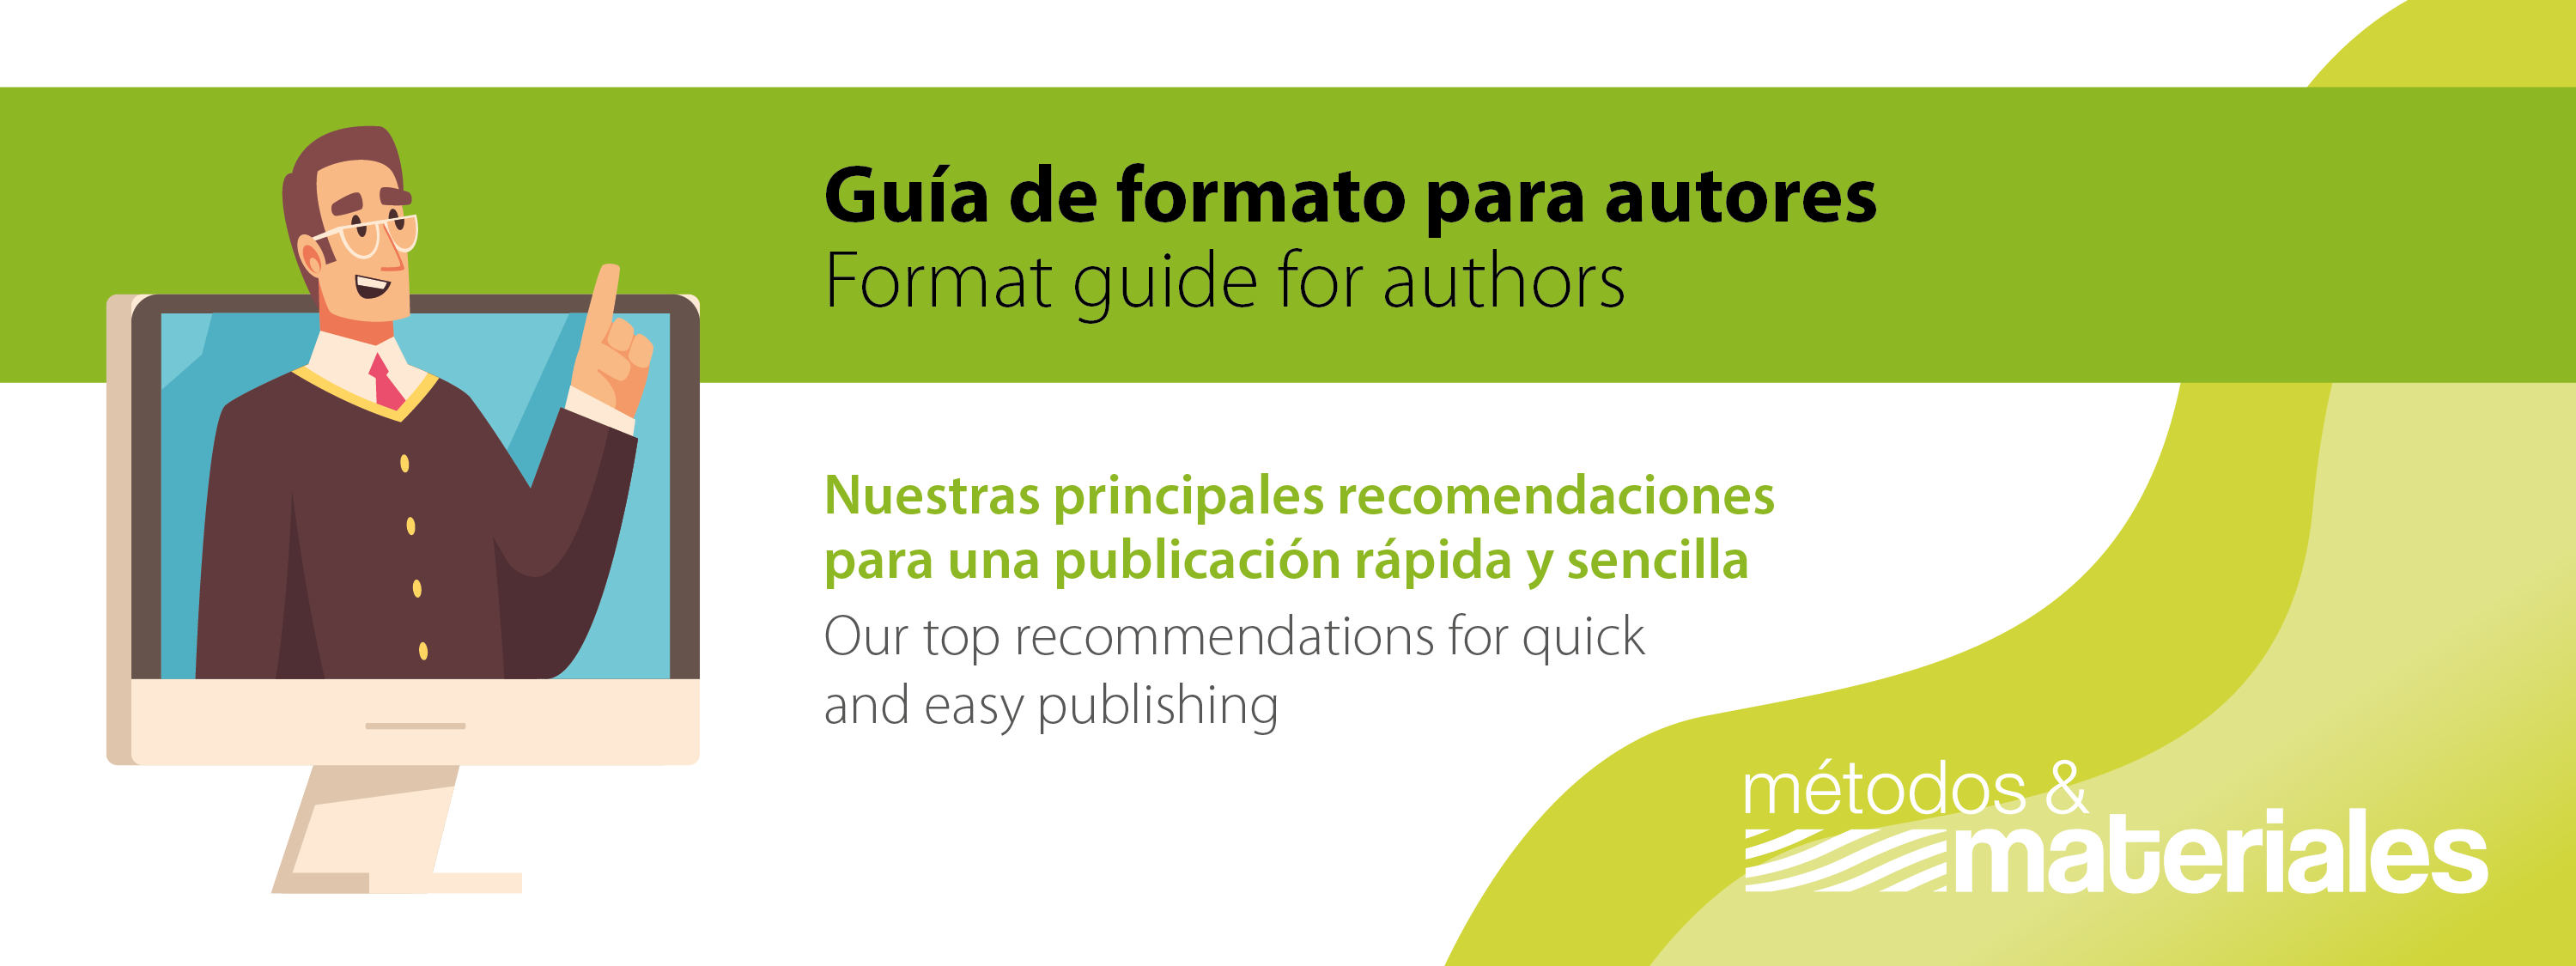 Format guide for authors